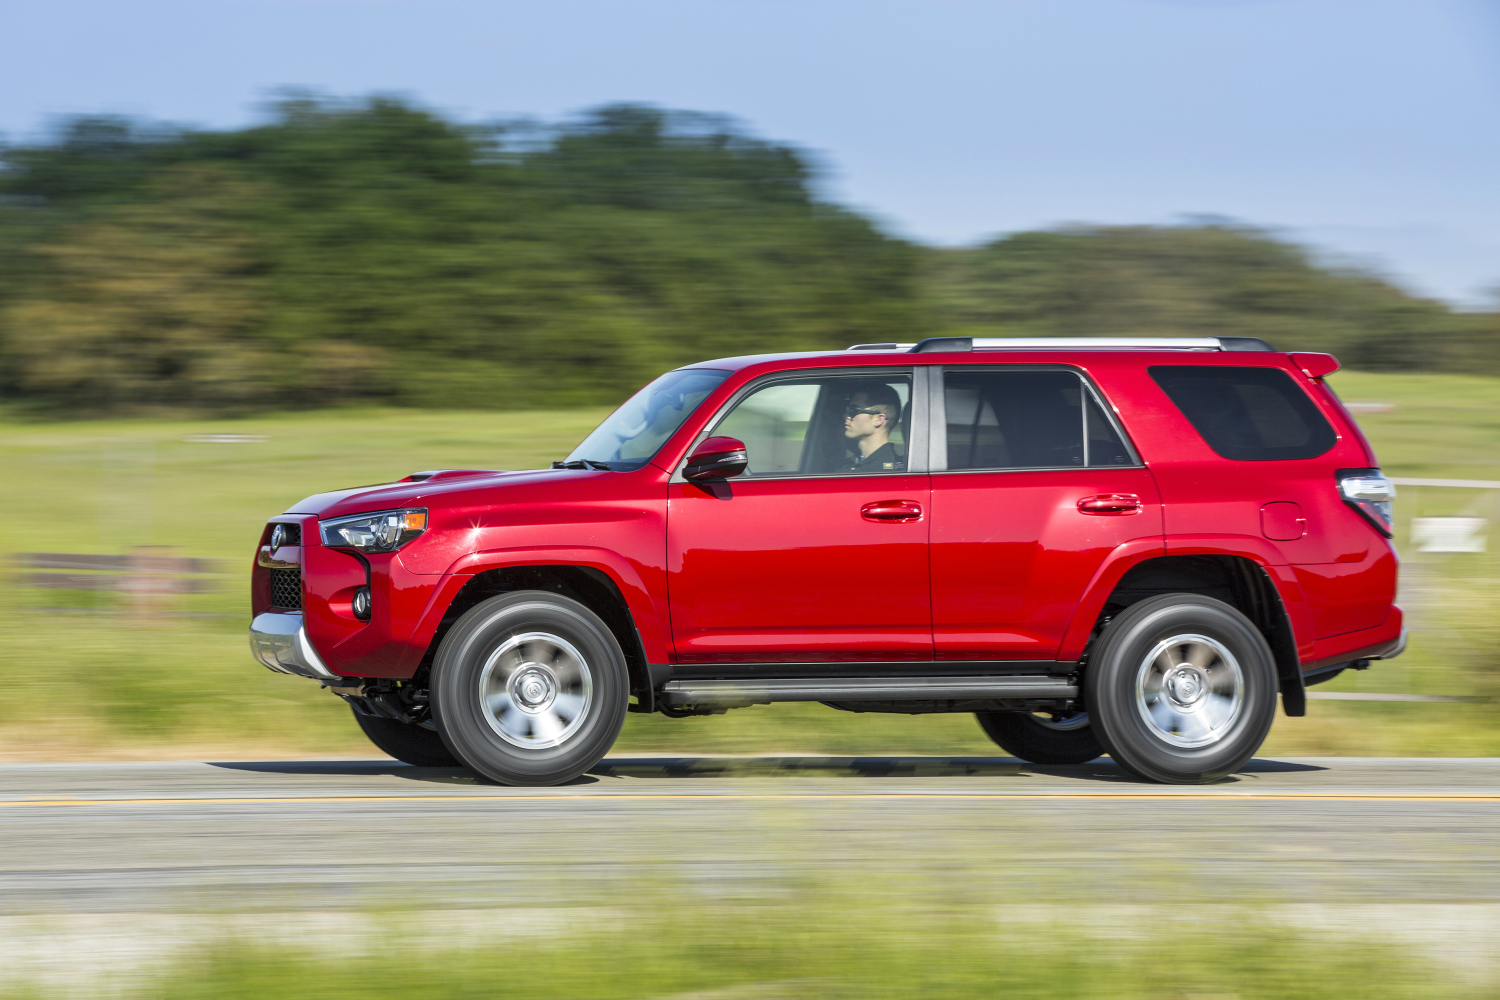 2018 toyota 4runner specs release date price performance 09